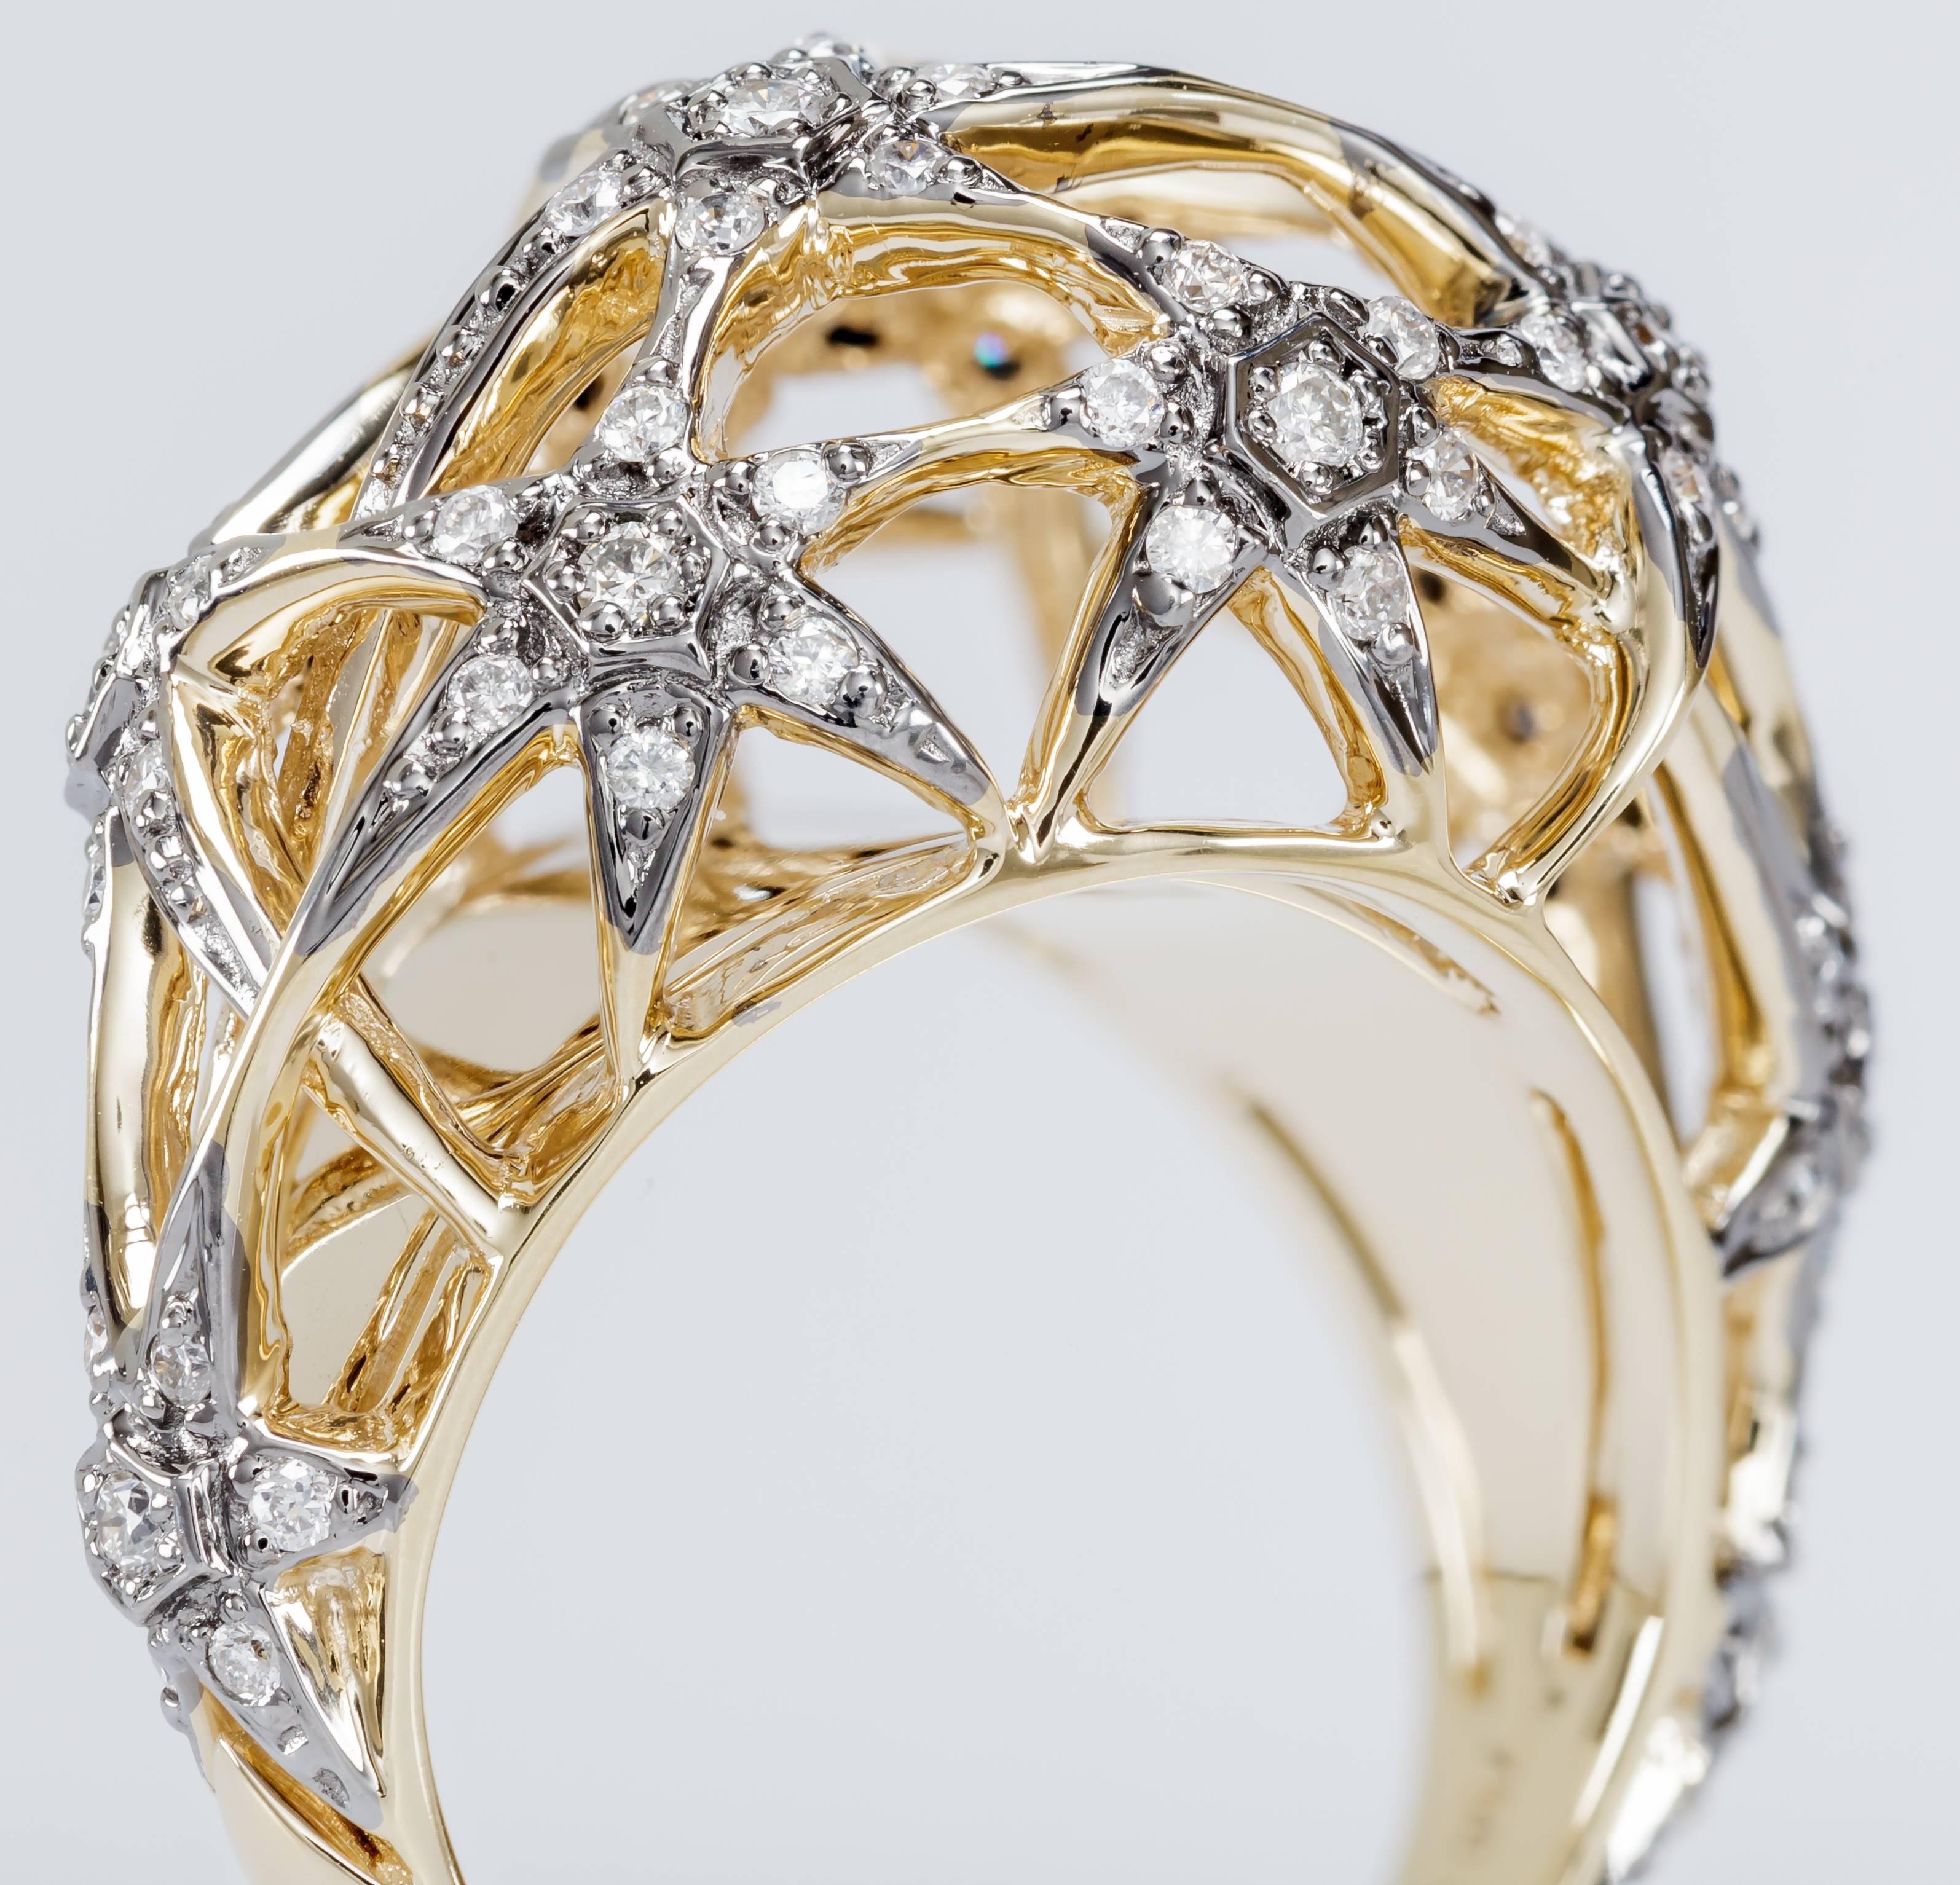 This new H. Stern Copernicus ring features diamonds totaling 0.46ct set in black rhodium and 18k noble gold.  Noble gold, H. Stern's signature alloy, has the warmth of yellow gold and the elegance of white gold.  This ring is a size 6.  It measures